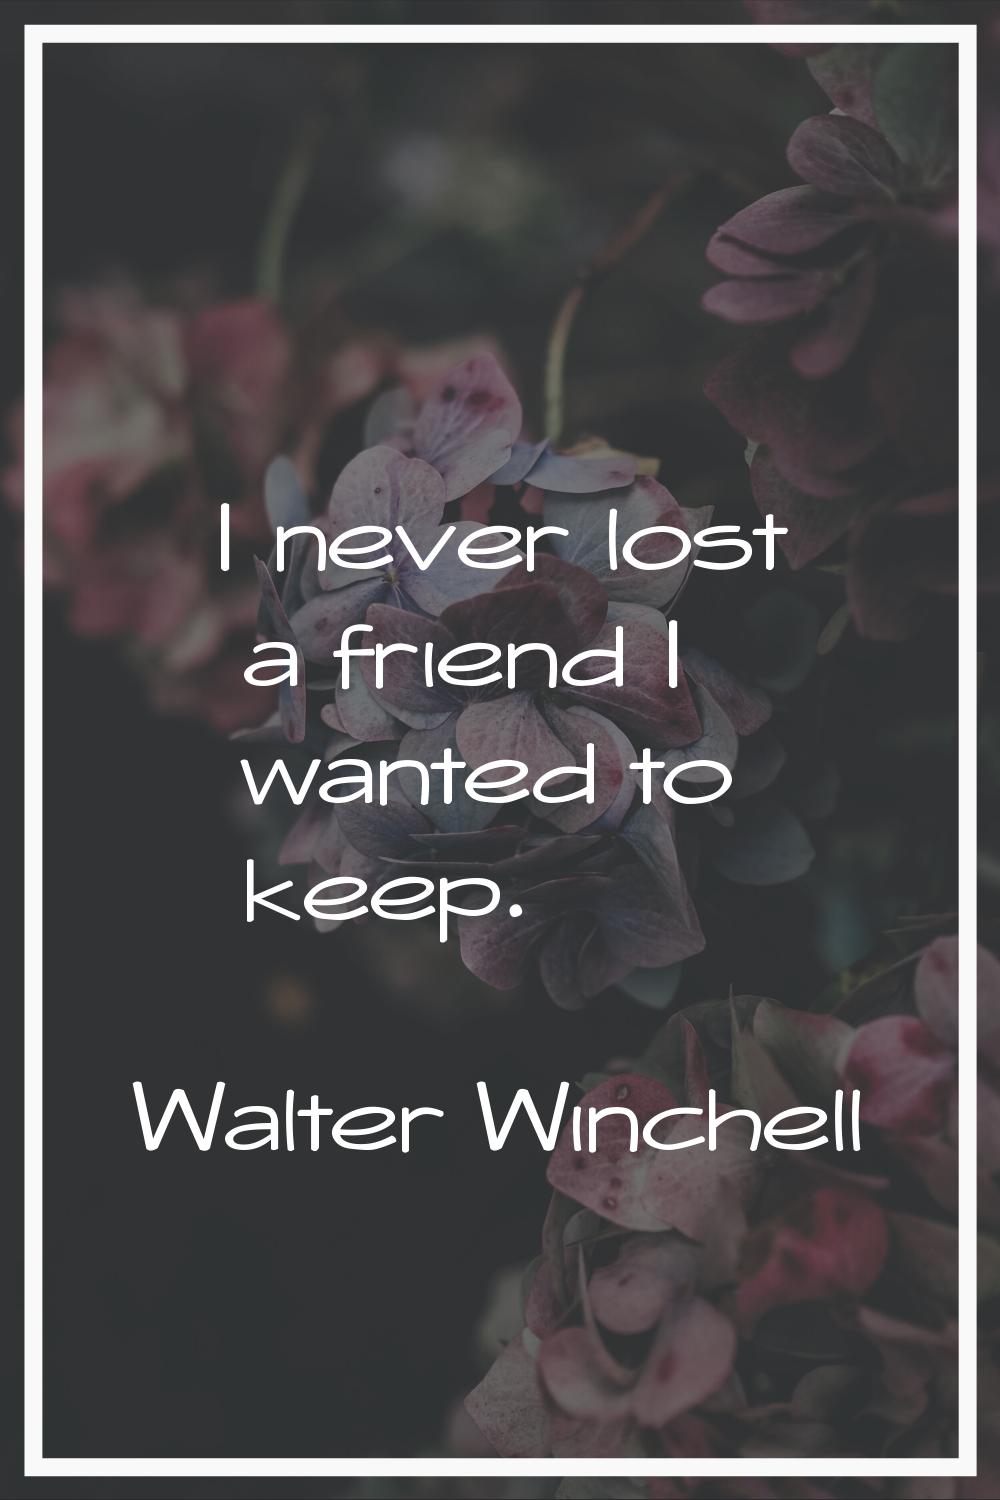 I never lost a friend I wanted to keep.